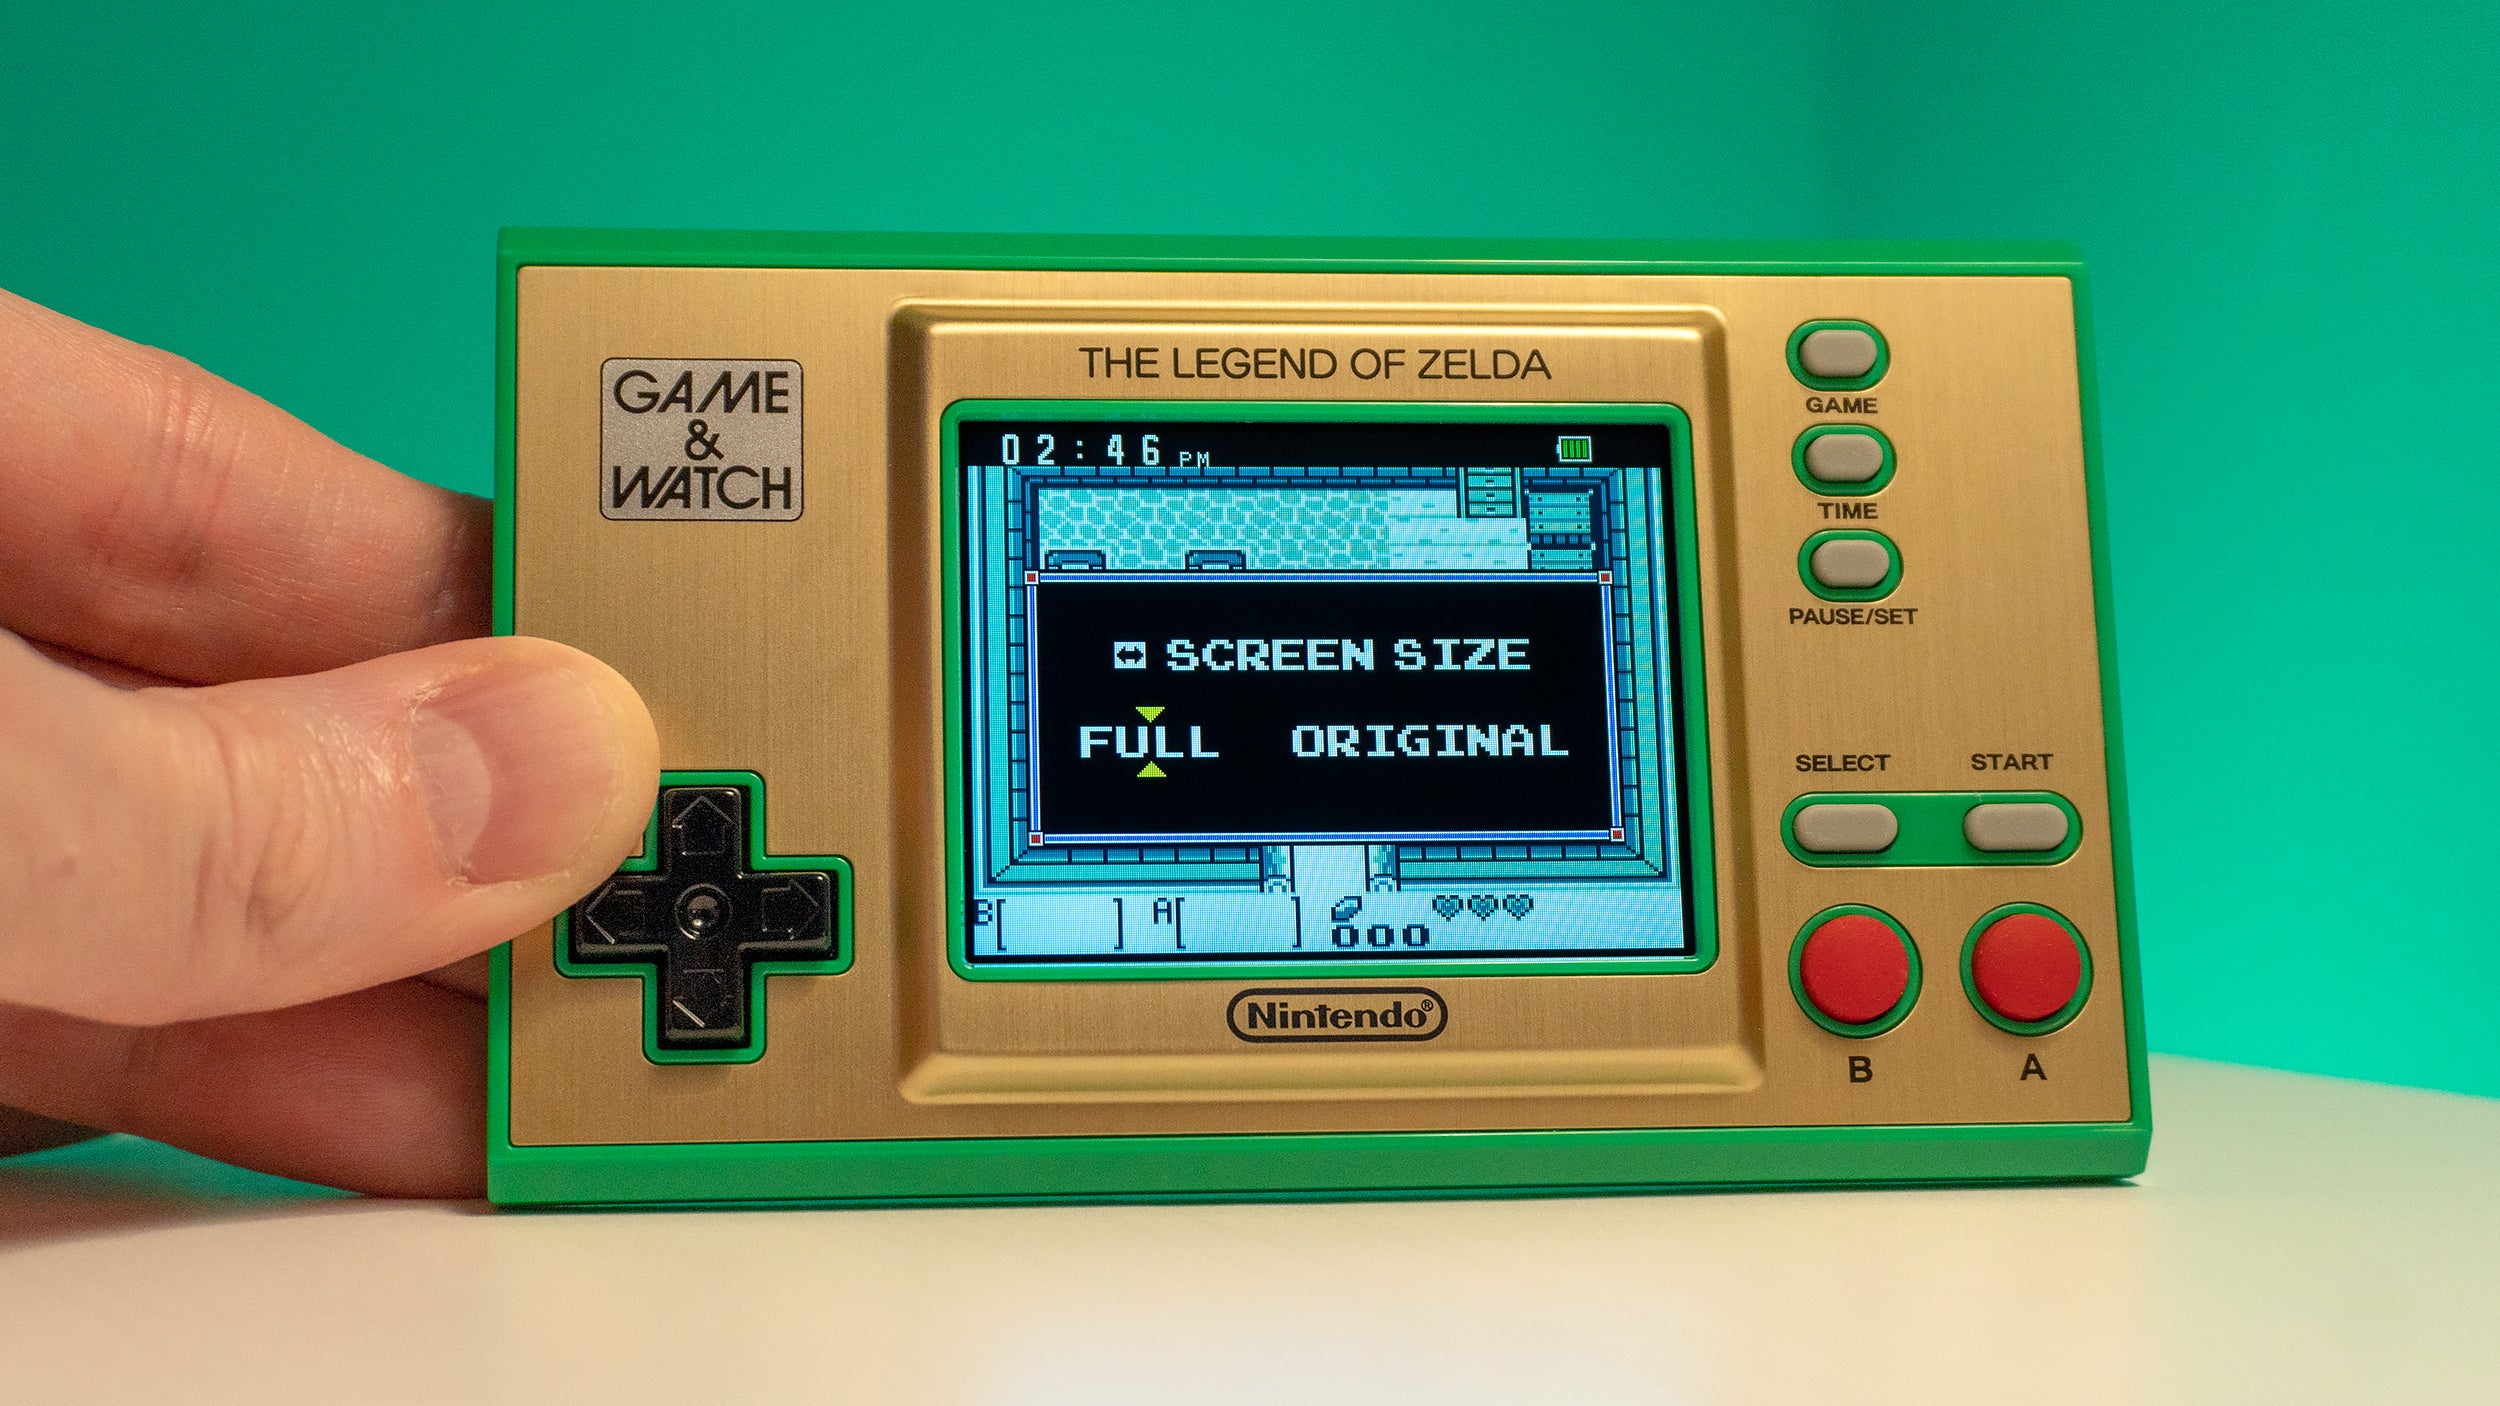 You can toggle between the box aspect ratio of the game as it appeared on the Game Boy's screen, or stretch it out to fill the G&W's slightly wider display. (Photo: Andrew Liszewski - Gizmodo)